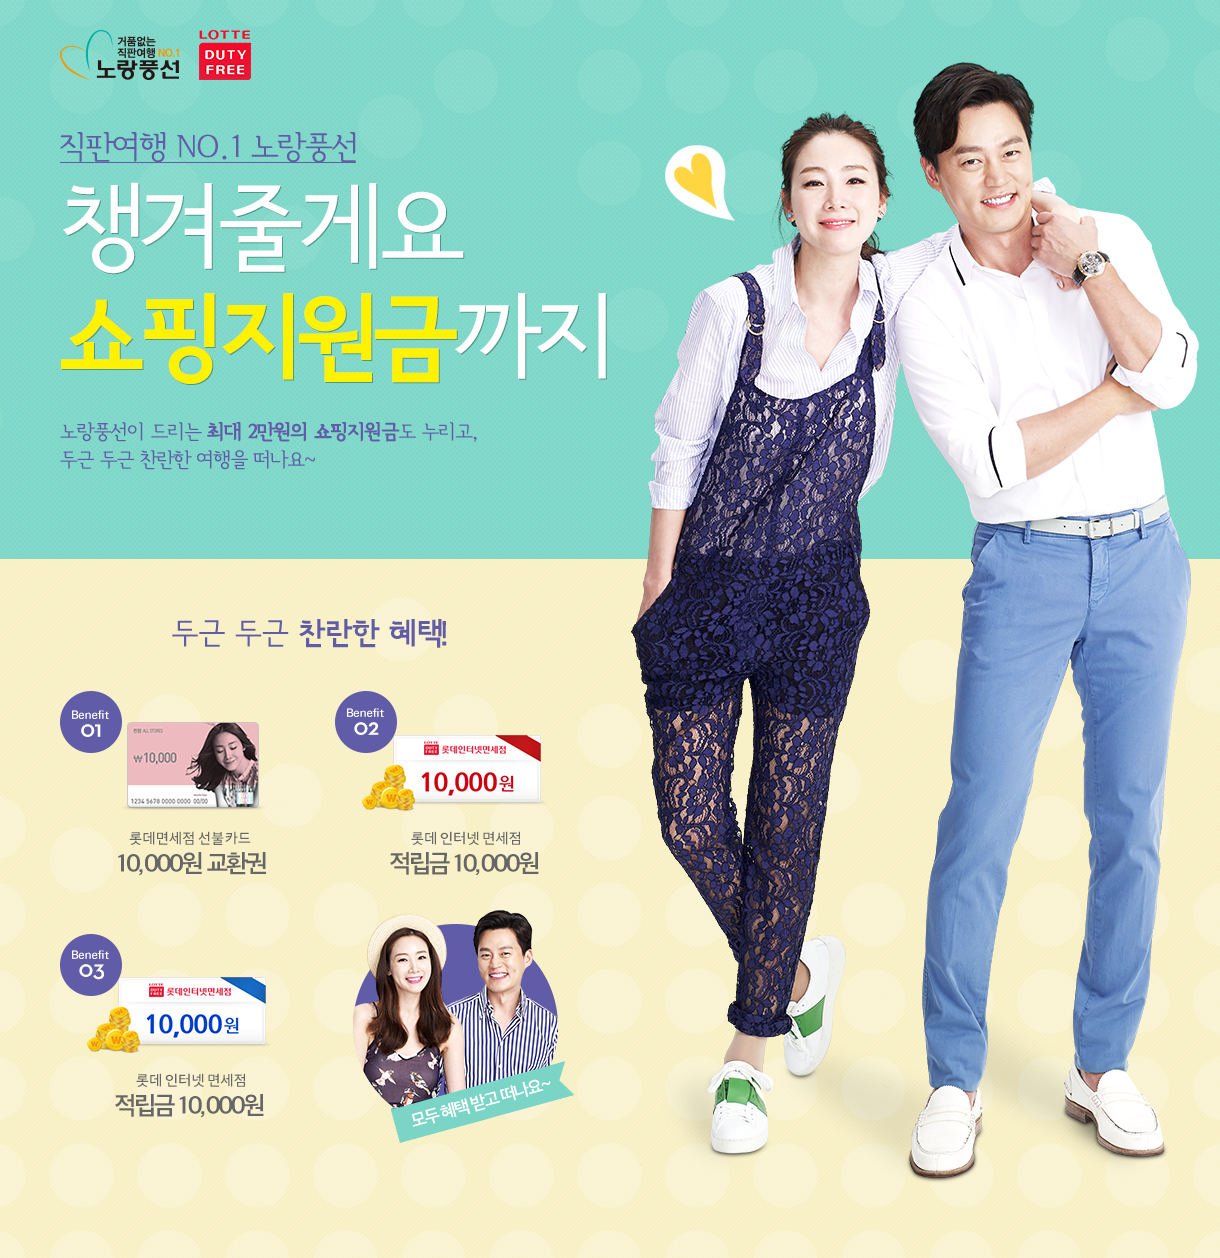 http://cdn.ybtour.co.kr/event/event/2015/0630_ev7_lotteDF/images/150630_ev_lotteDF_img.png